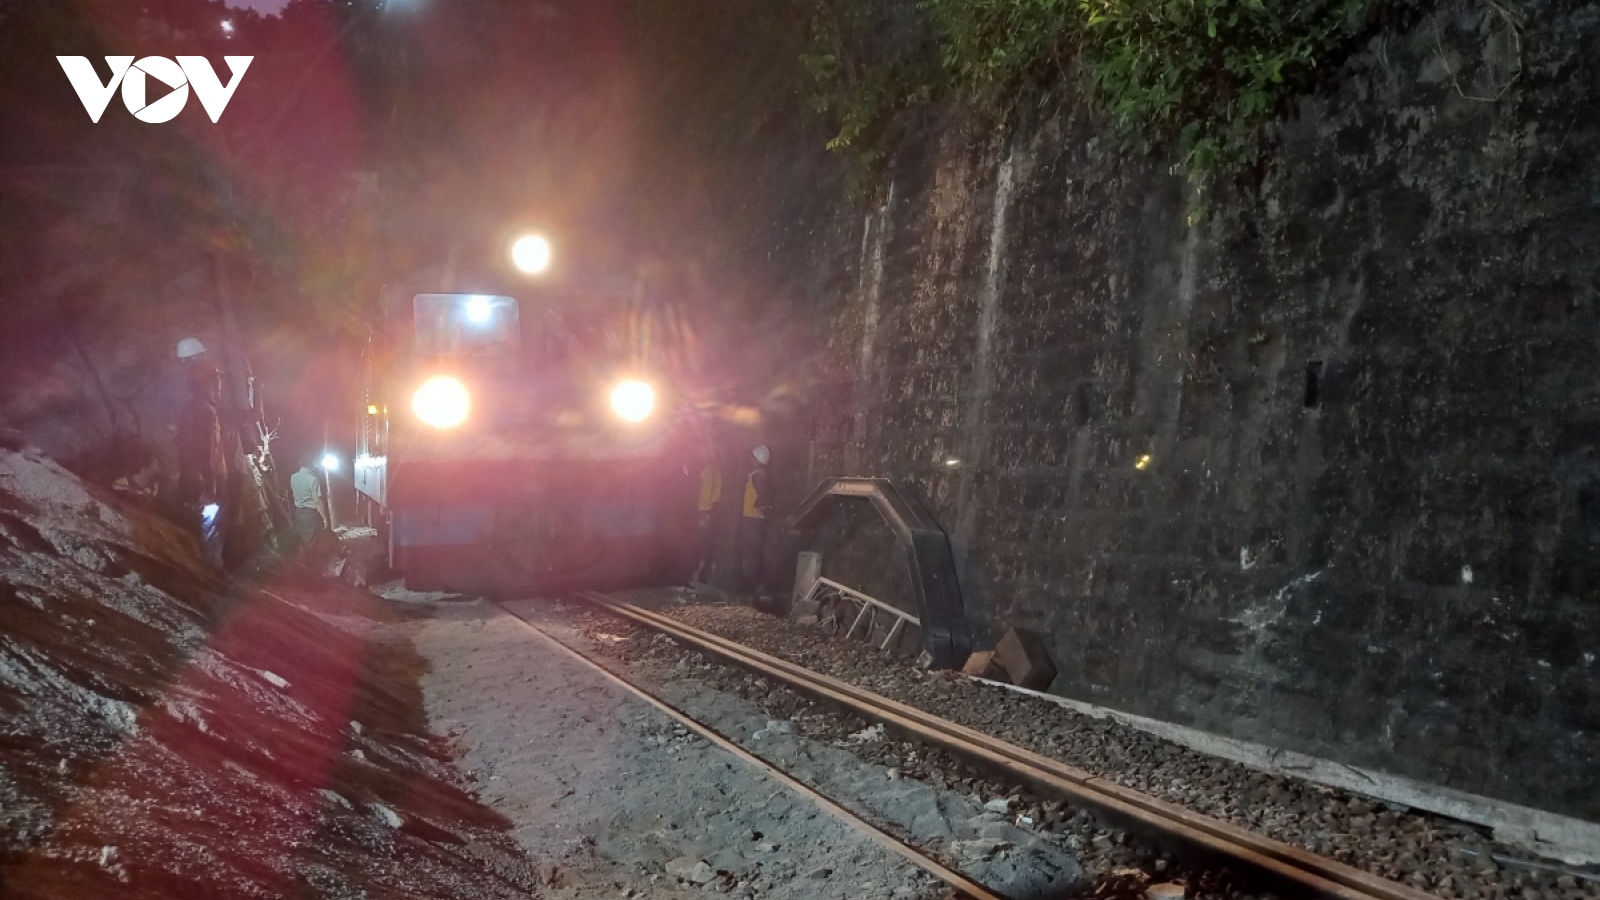 North-South rail service resumes after eight days of tunnel landslides